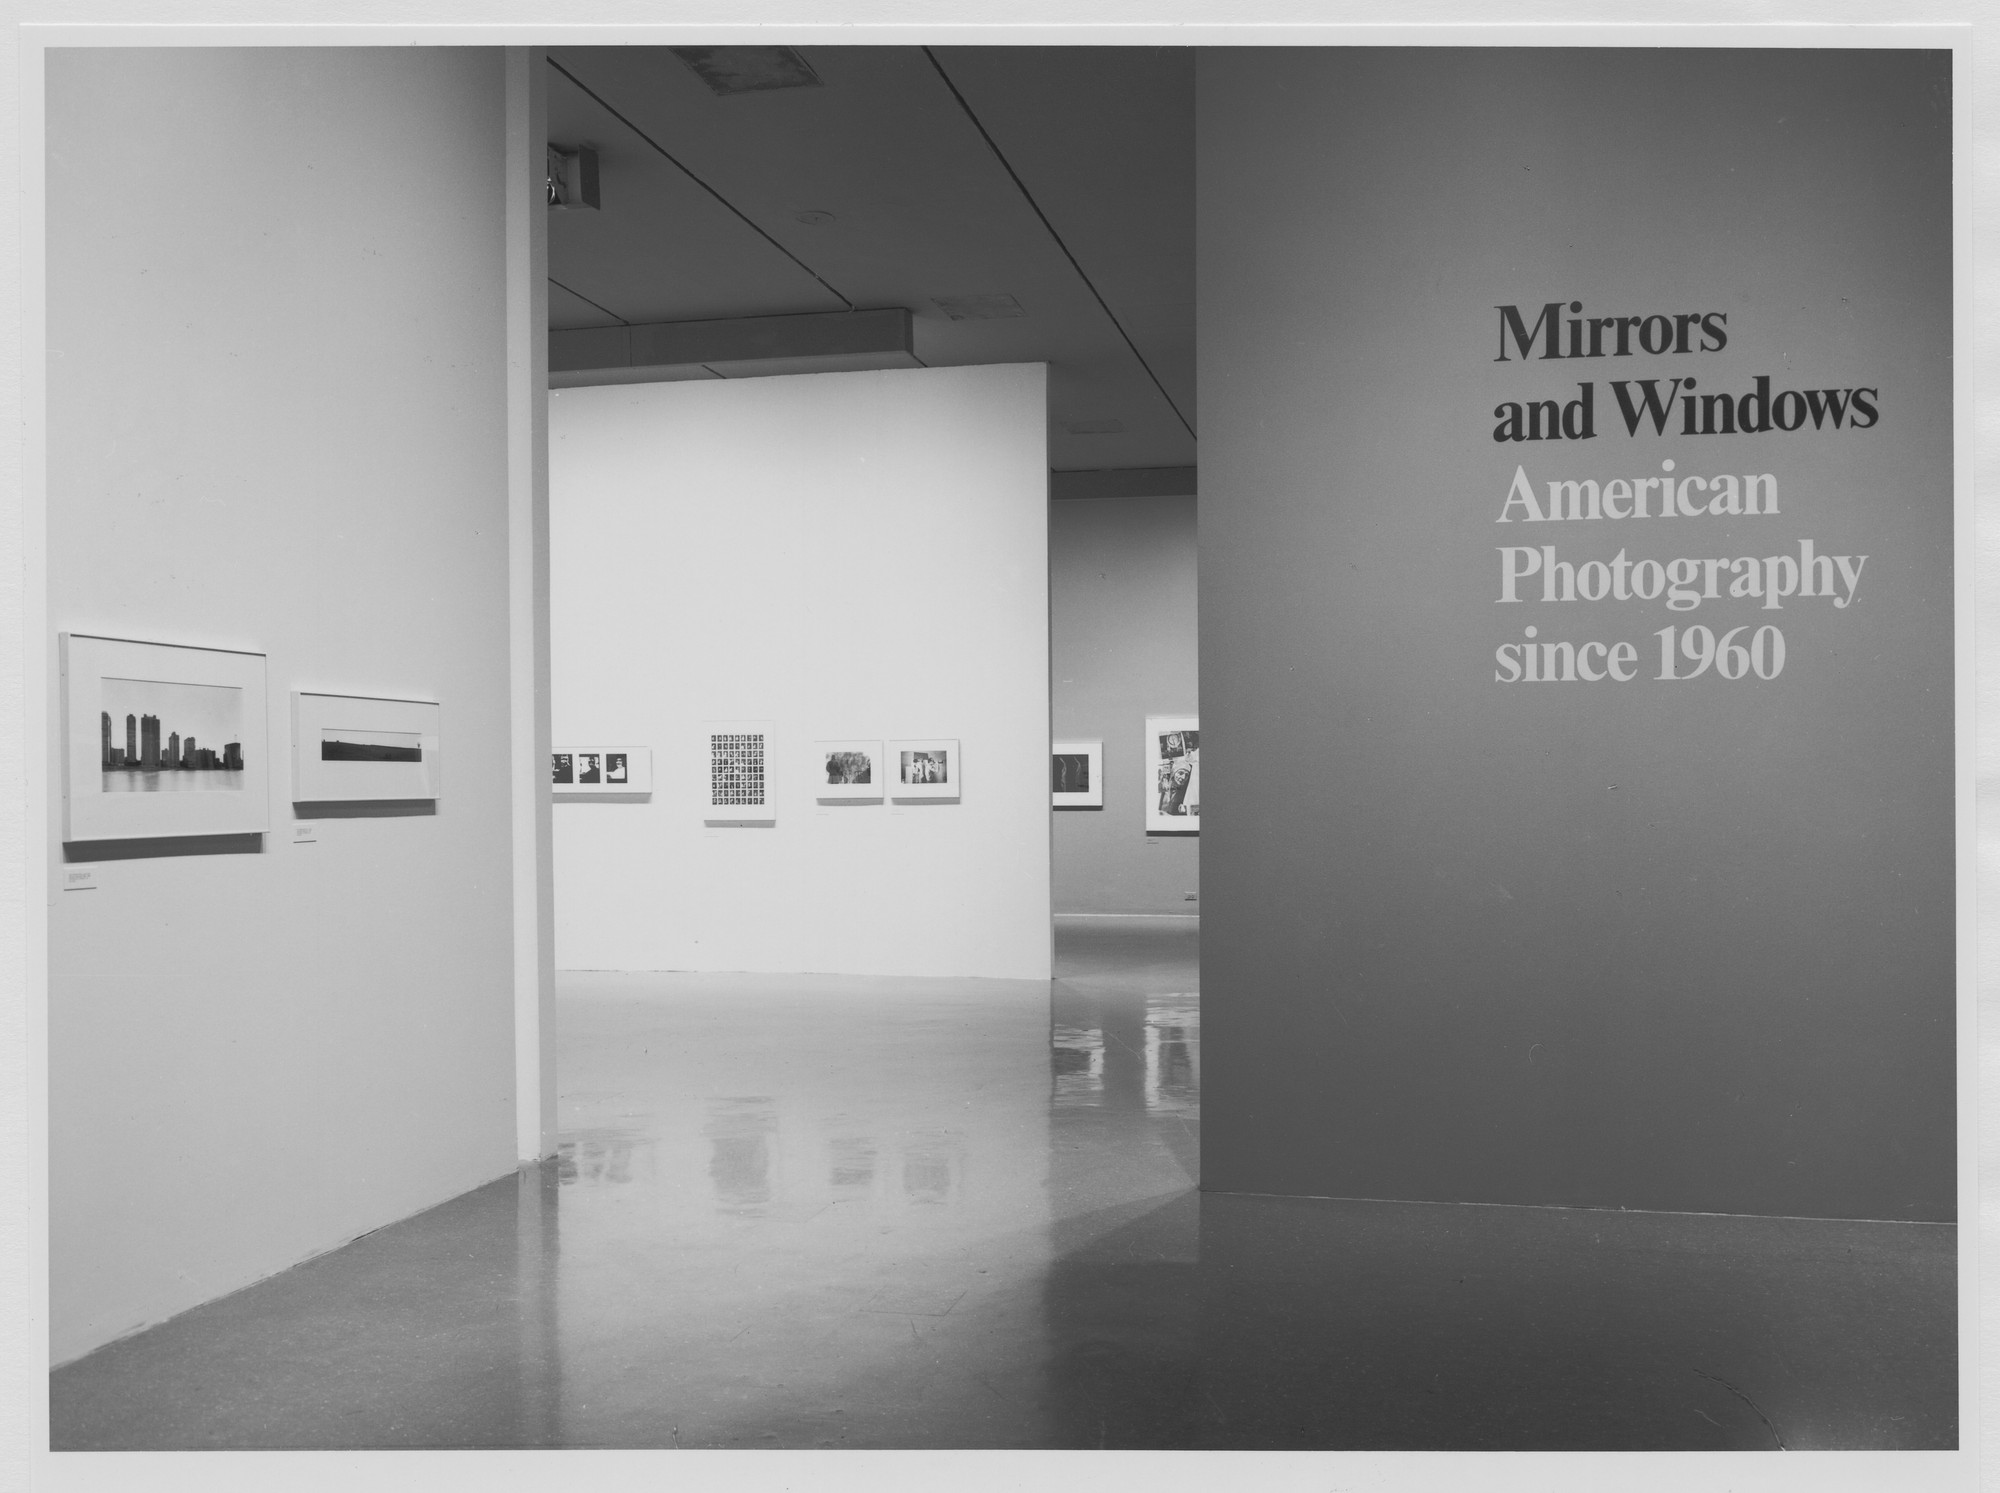 Mirrors and Windows: American Photography since 1960 | MoMA